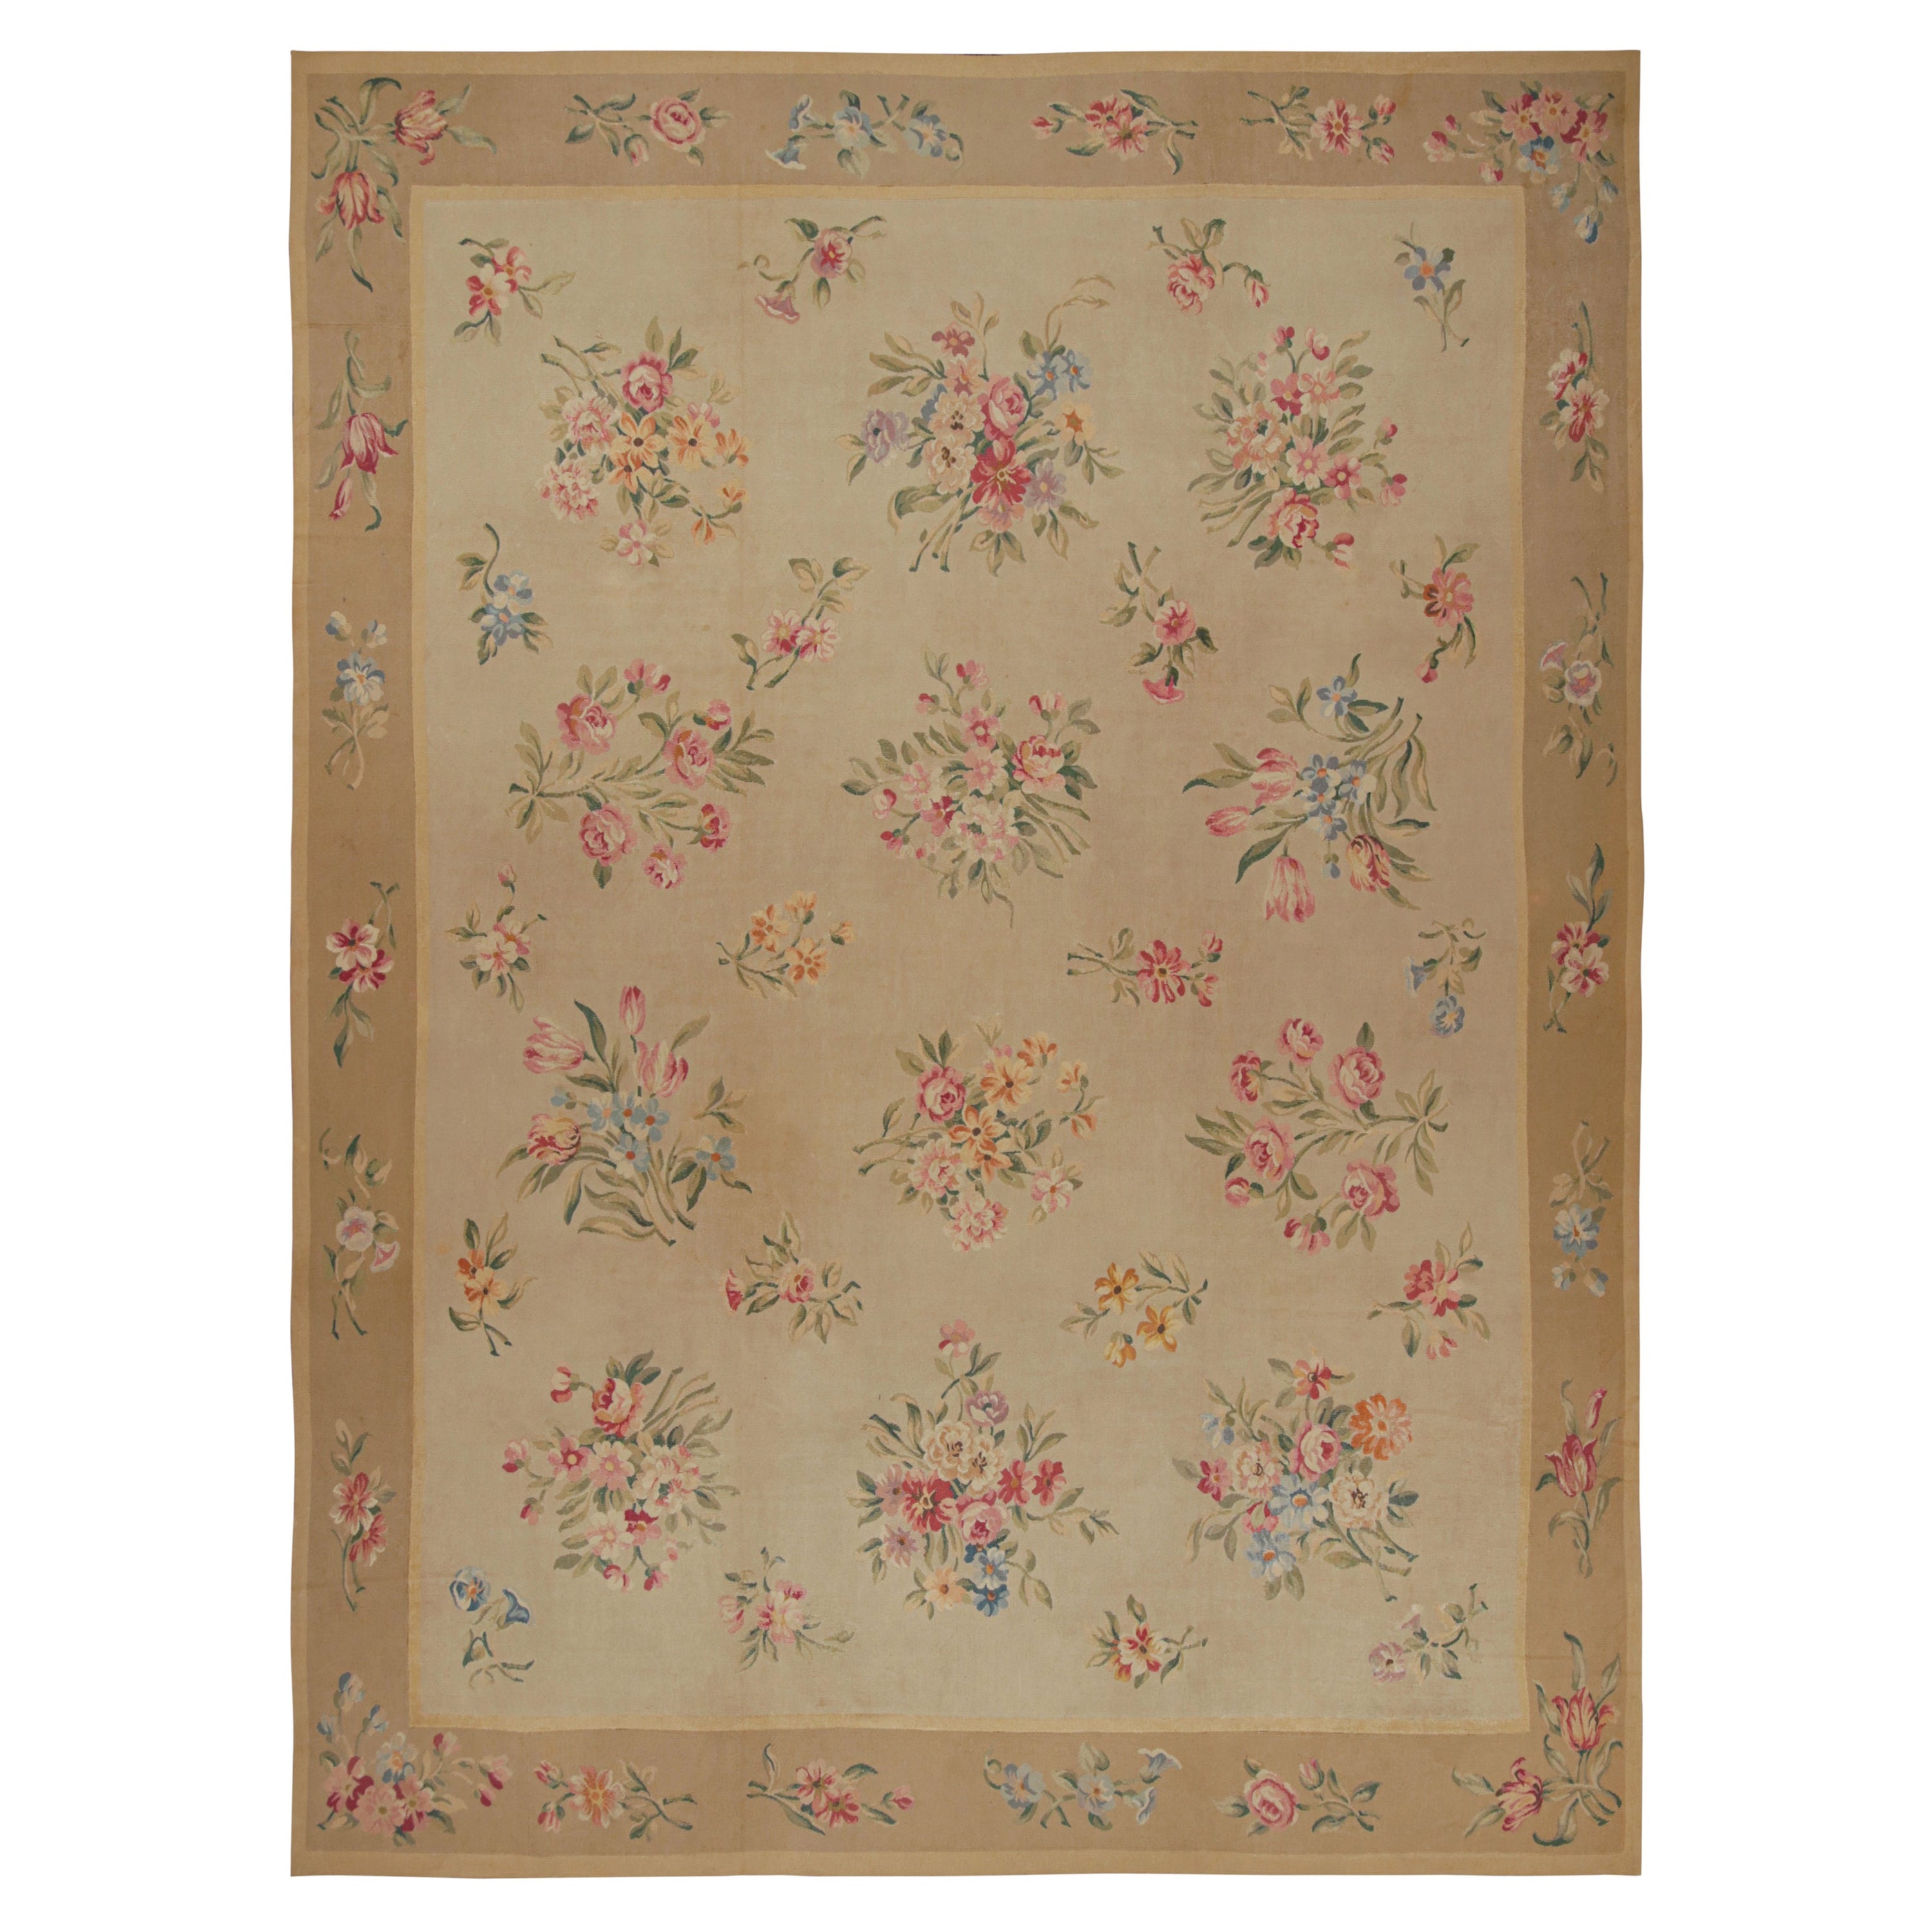 Antique Aubusson Rug in Beige-Brown with Floral Patterns, from Rug & Kilim